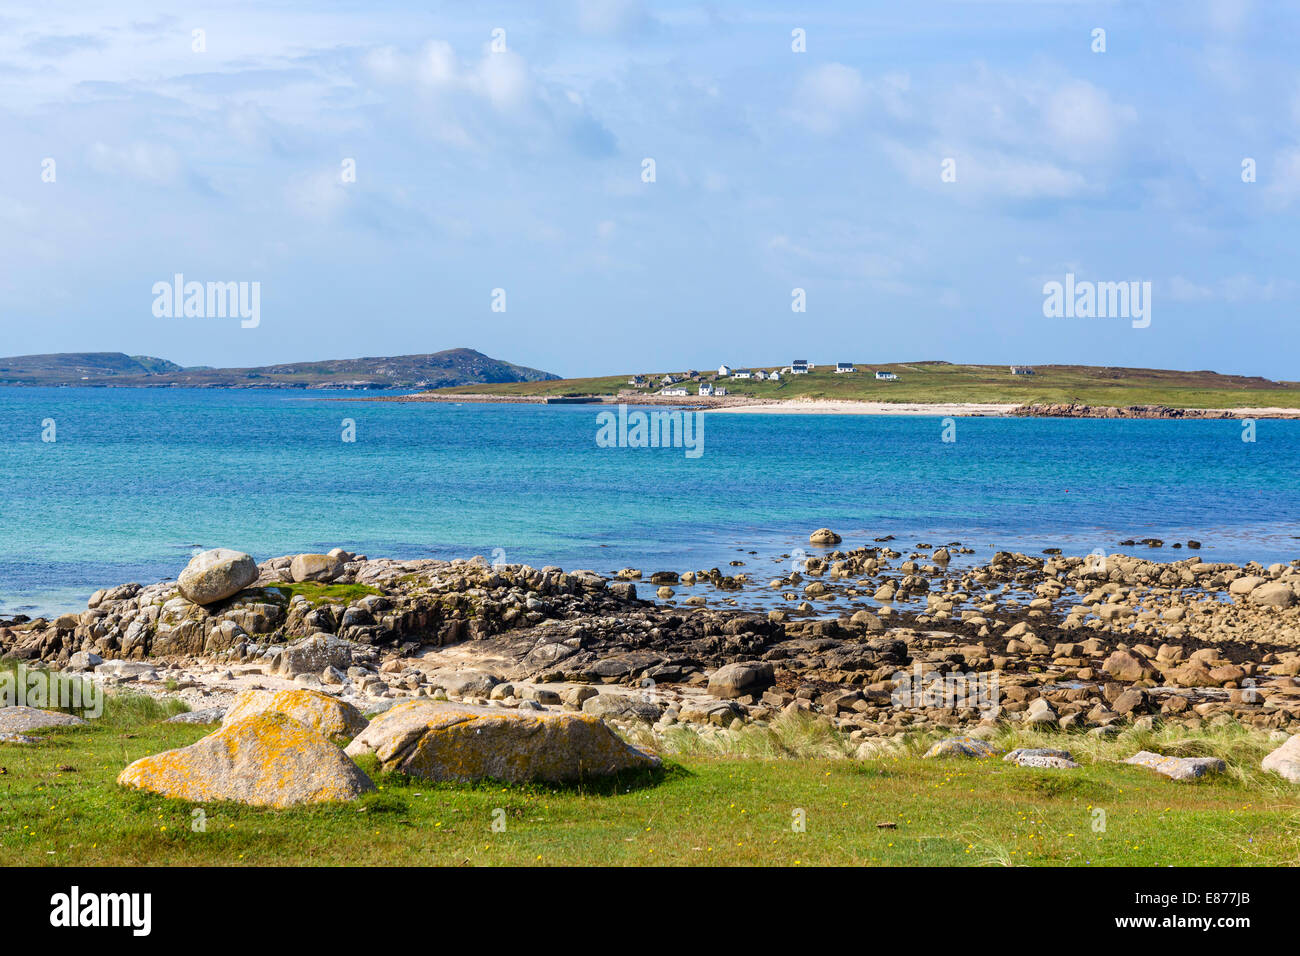 The coast north of Derrybeg looking towards the island of Inishmeane, Gweedore, County Donegal, Republic of Ireland Stock Photo